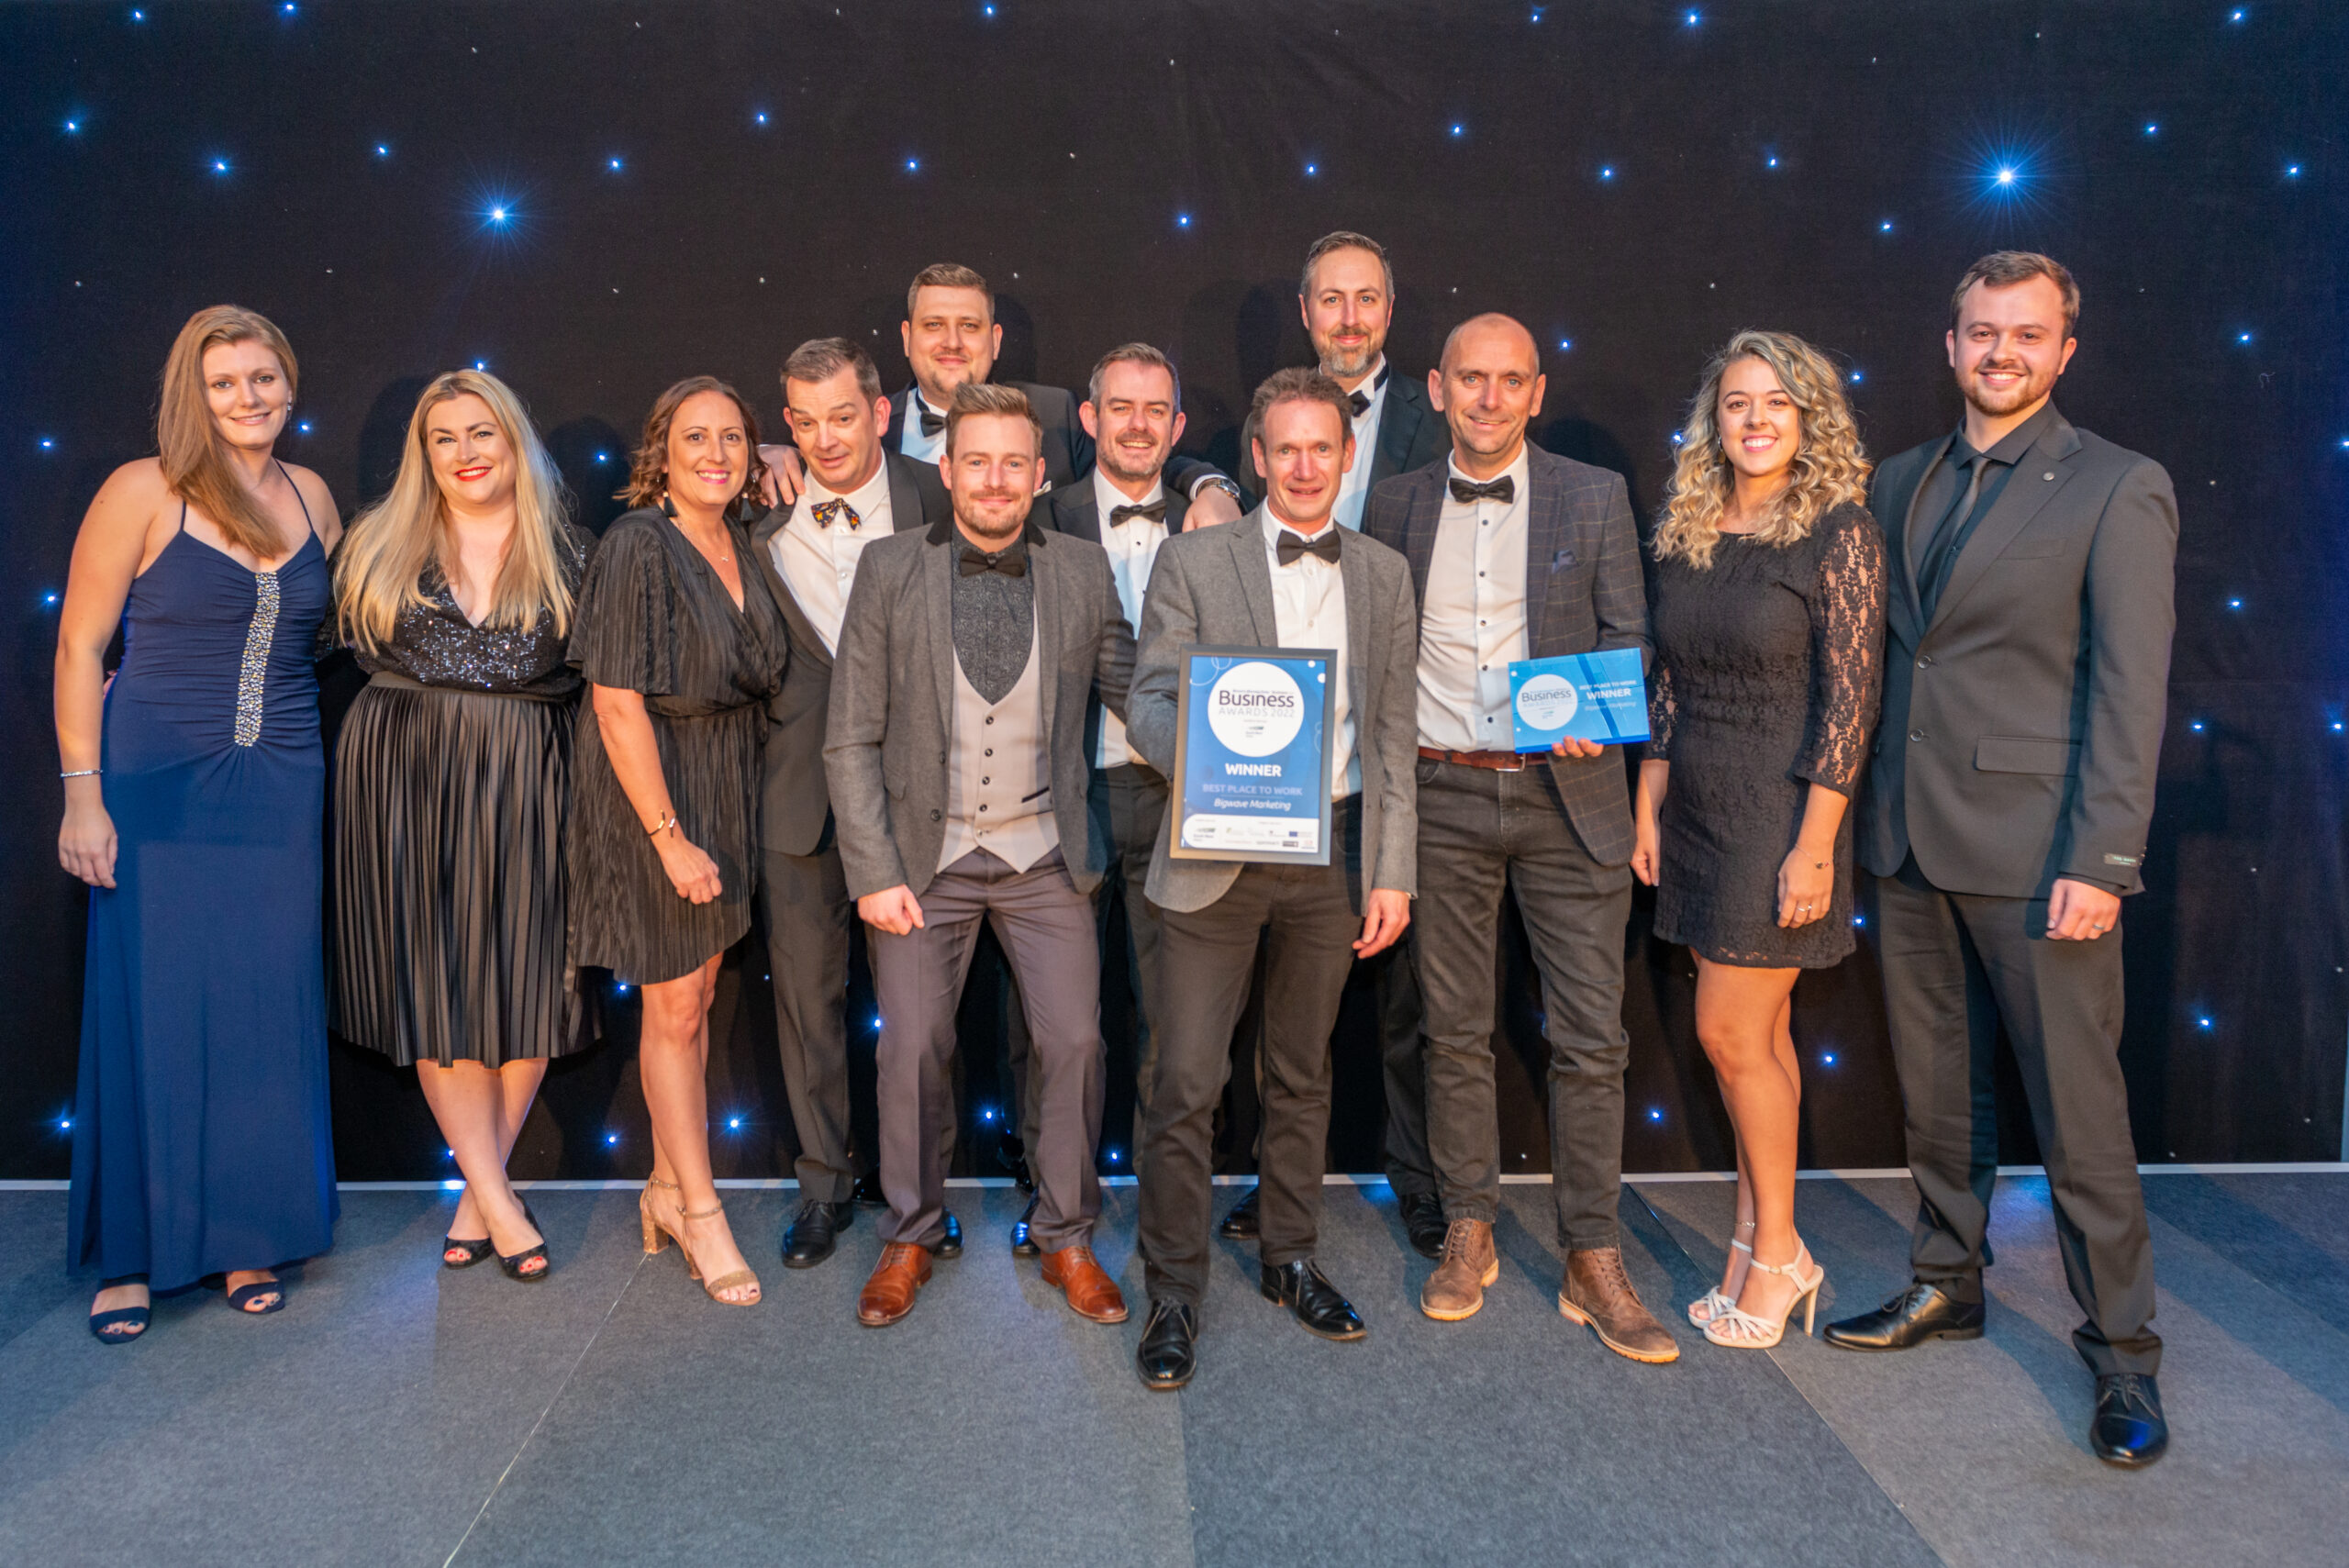 It’s Official, Bigwave Marketing Has Been Named ‘Best Place to Work’ in the South West!